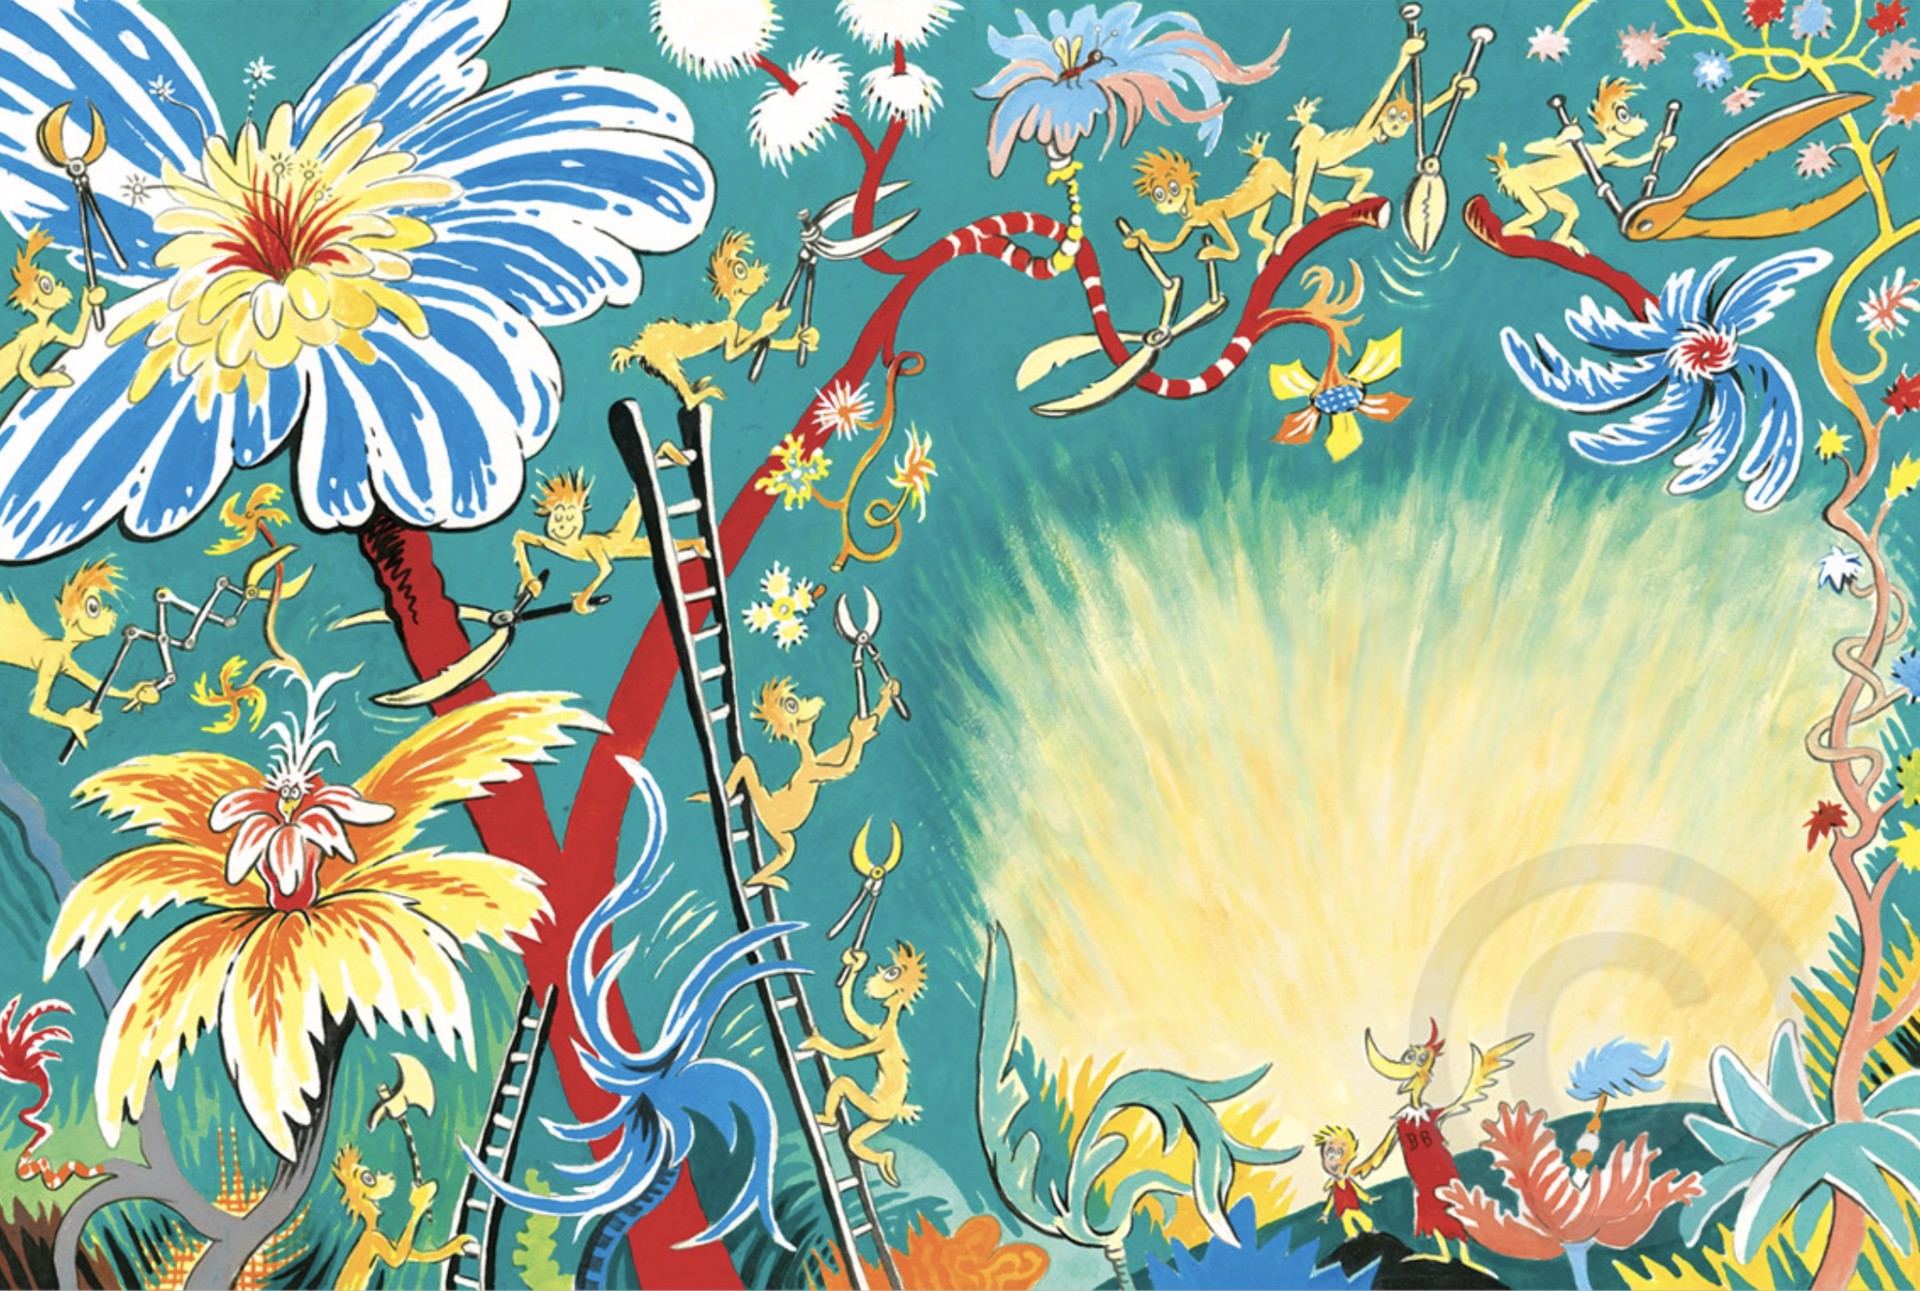 A PLETHORA OF FLOWERS by Dr. Seuss